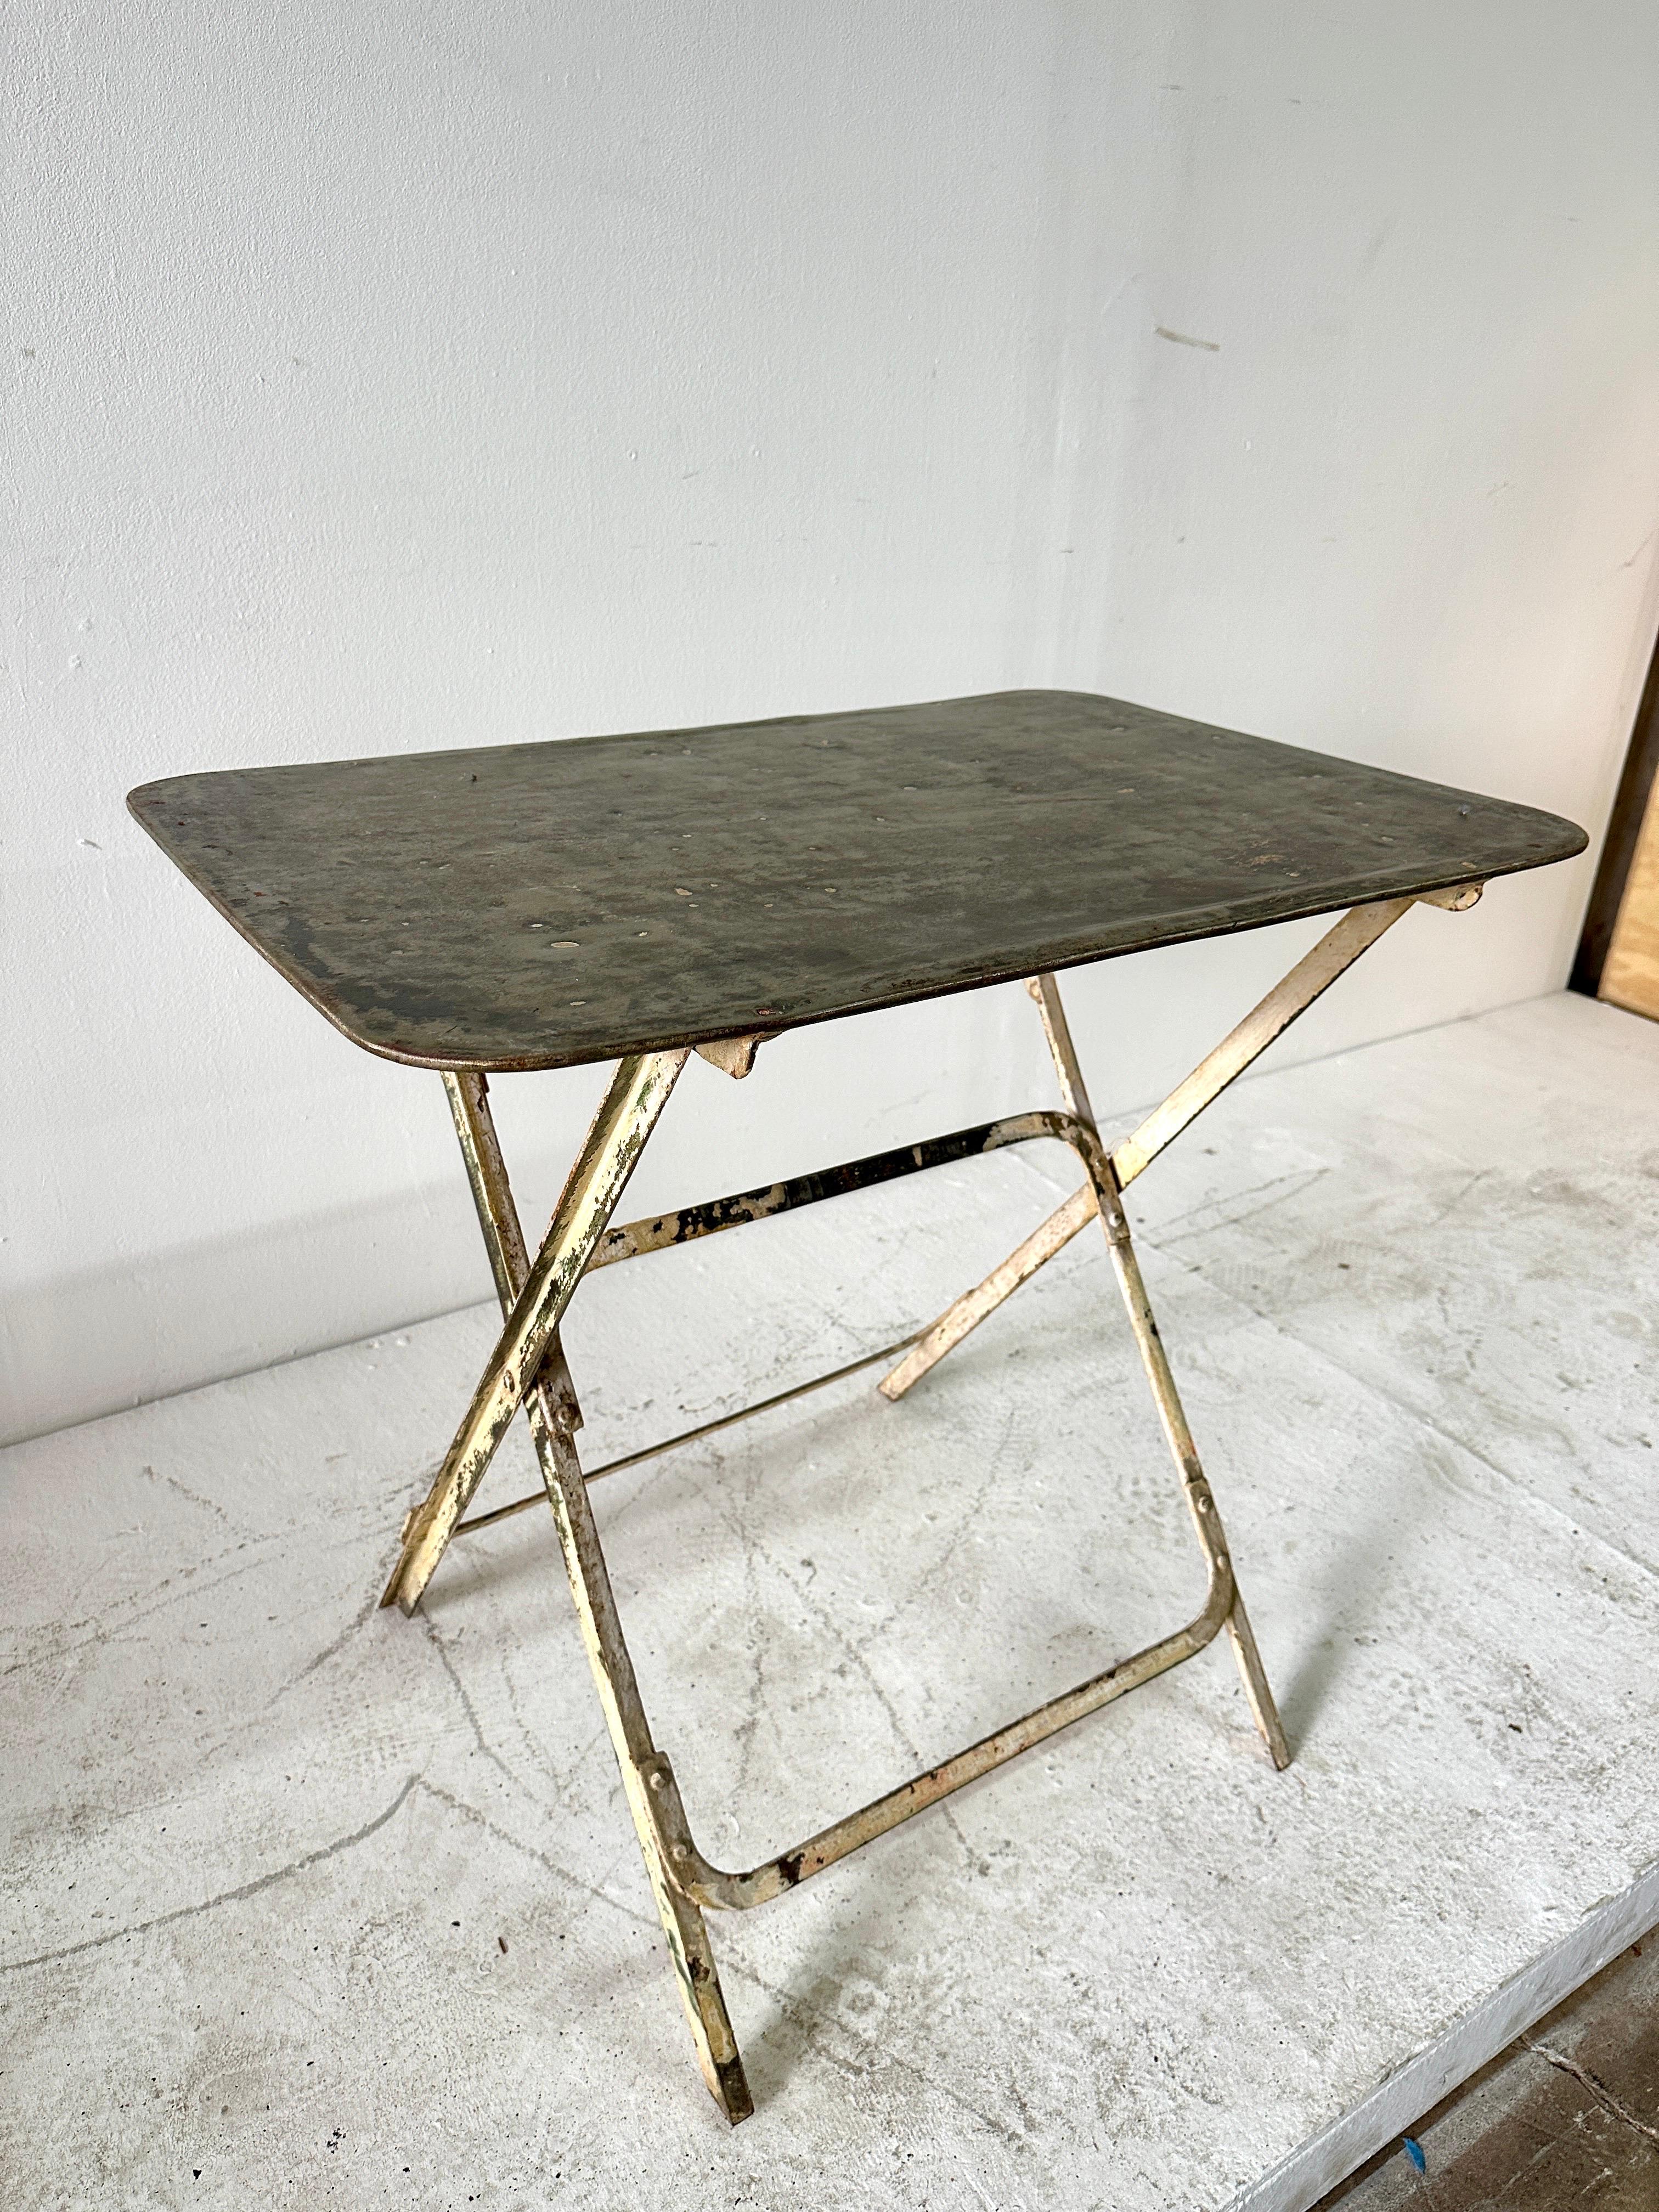 Vintage French Industrial & Distressed Metal Bistro Folding Table For Sale 4